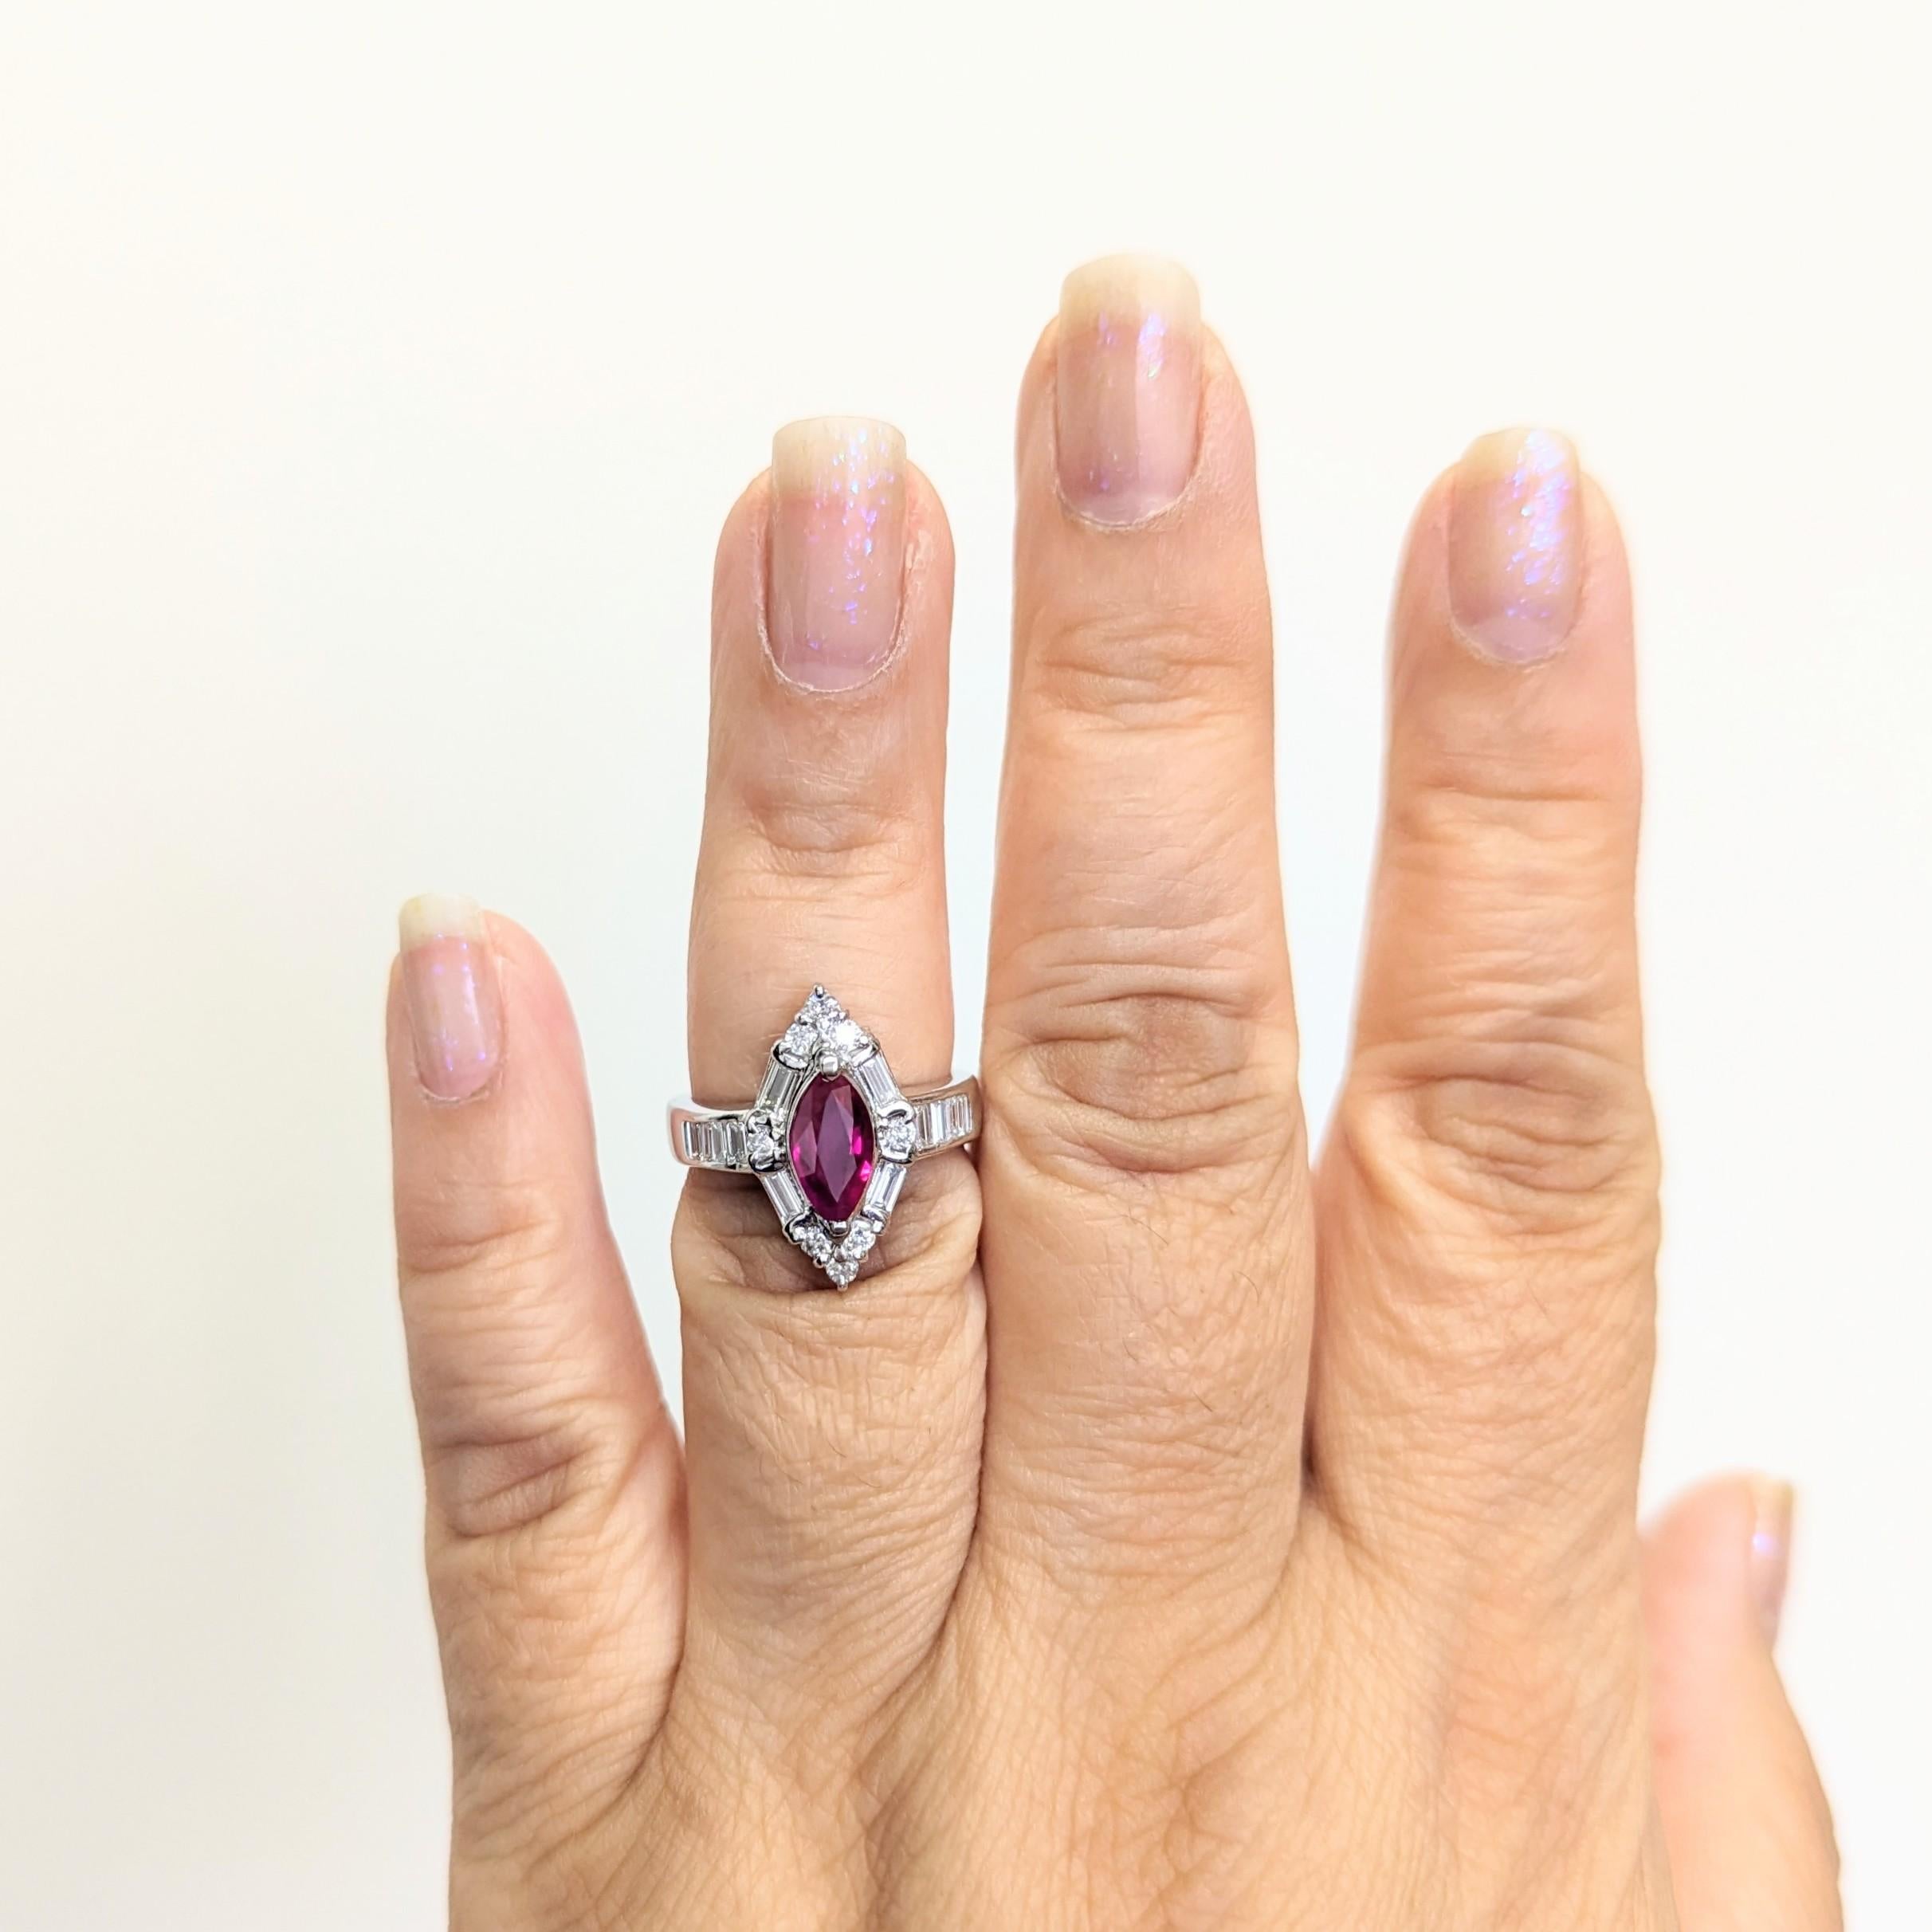 Beautiful 1.02 ct. ruby marquise with 0.78 ct. good quality white diamond rounds and baguettes.  Handmade in platinum.  Ring size 6.25.